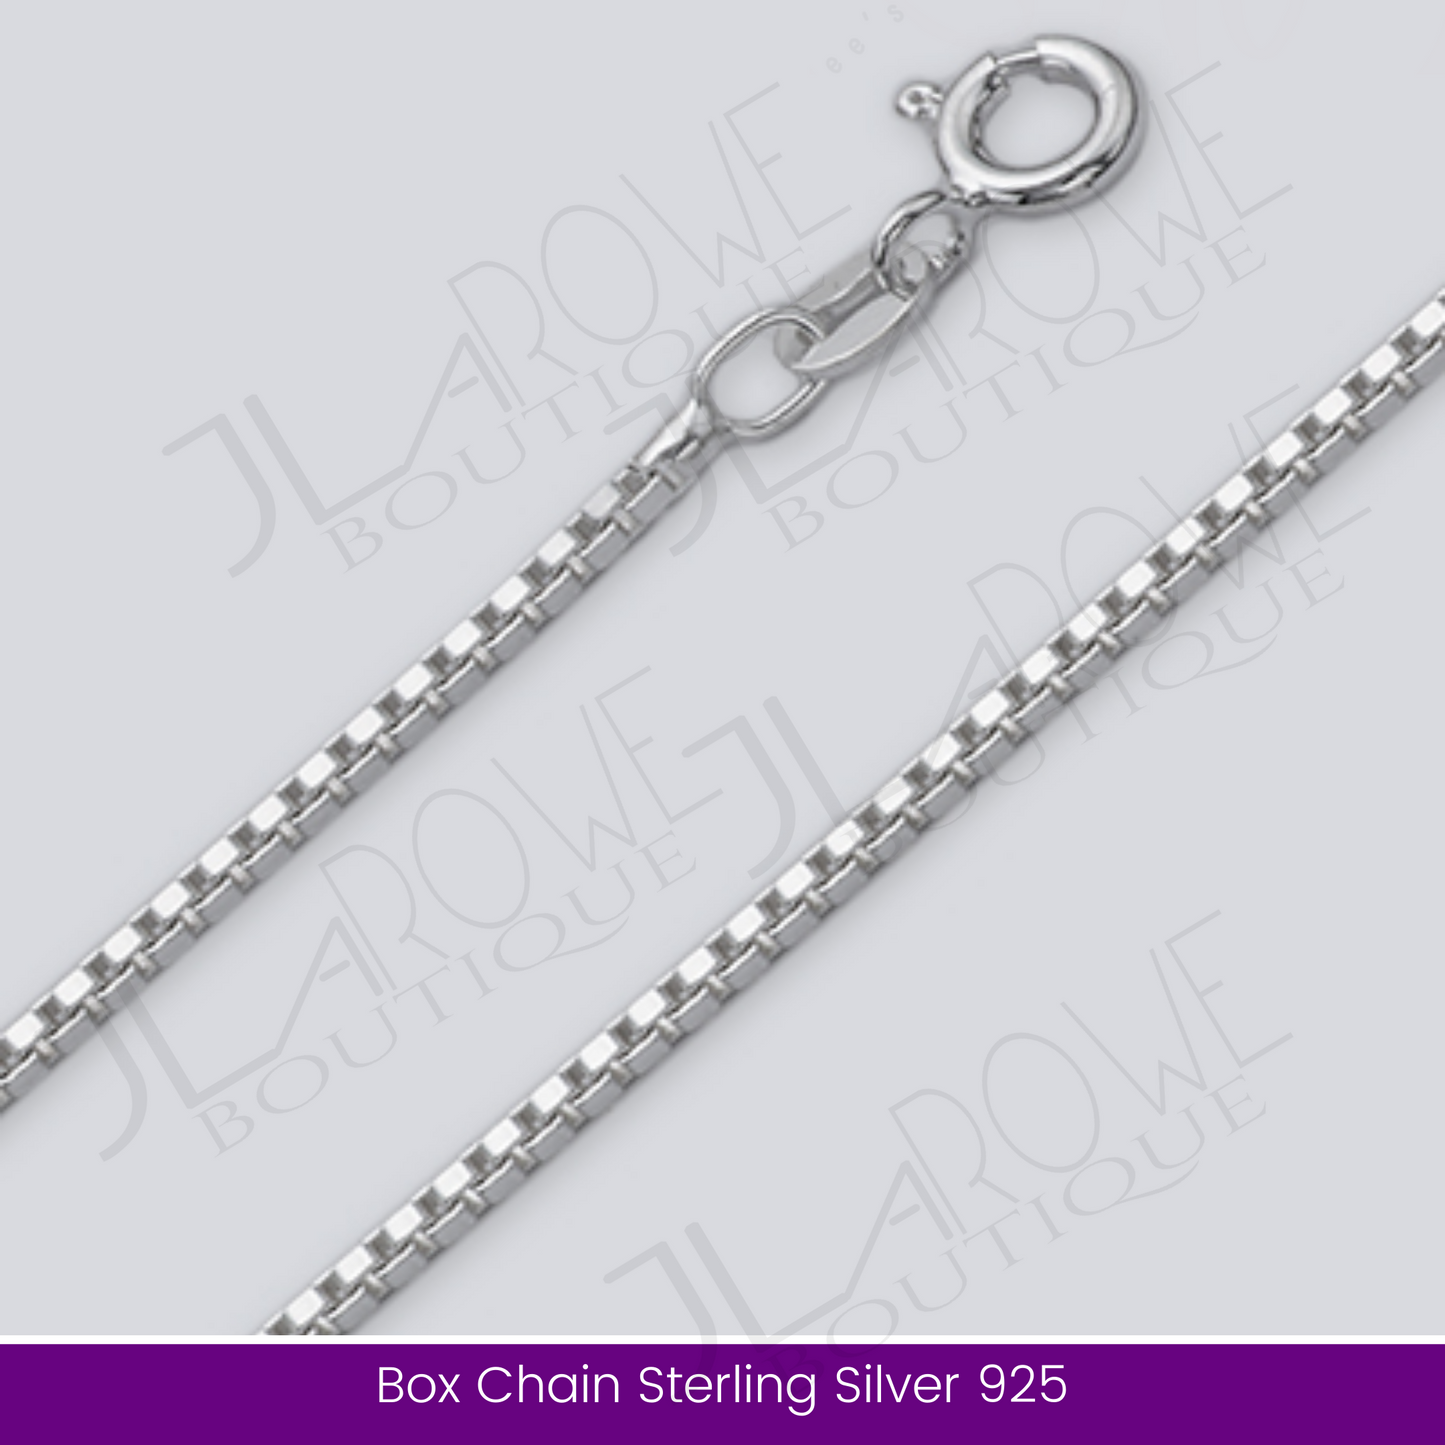 Box Chain Sterling Silver 925 (Limited Stock)